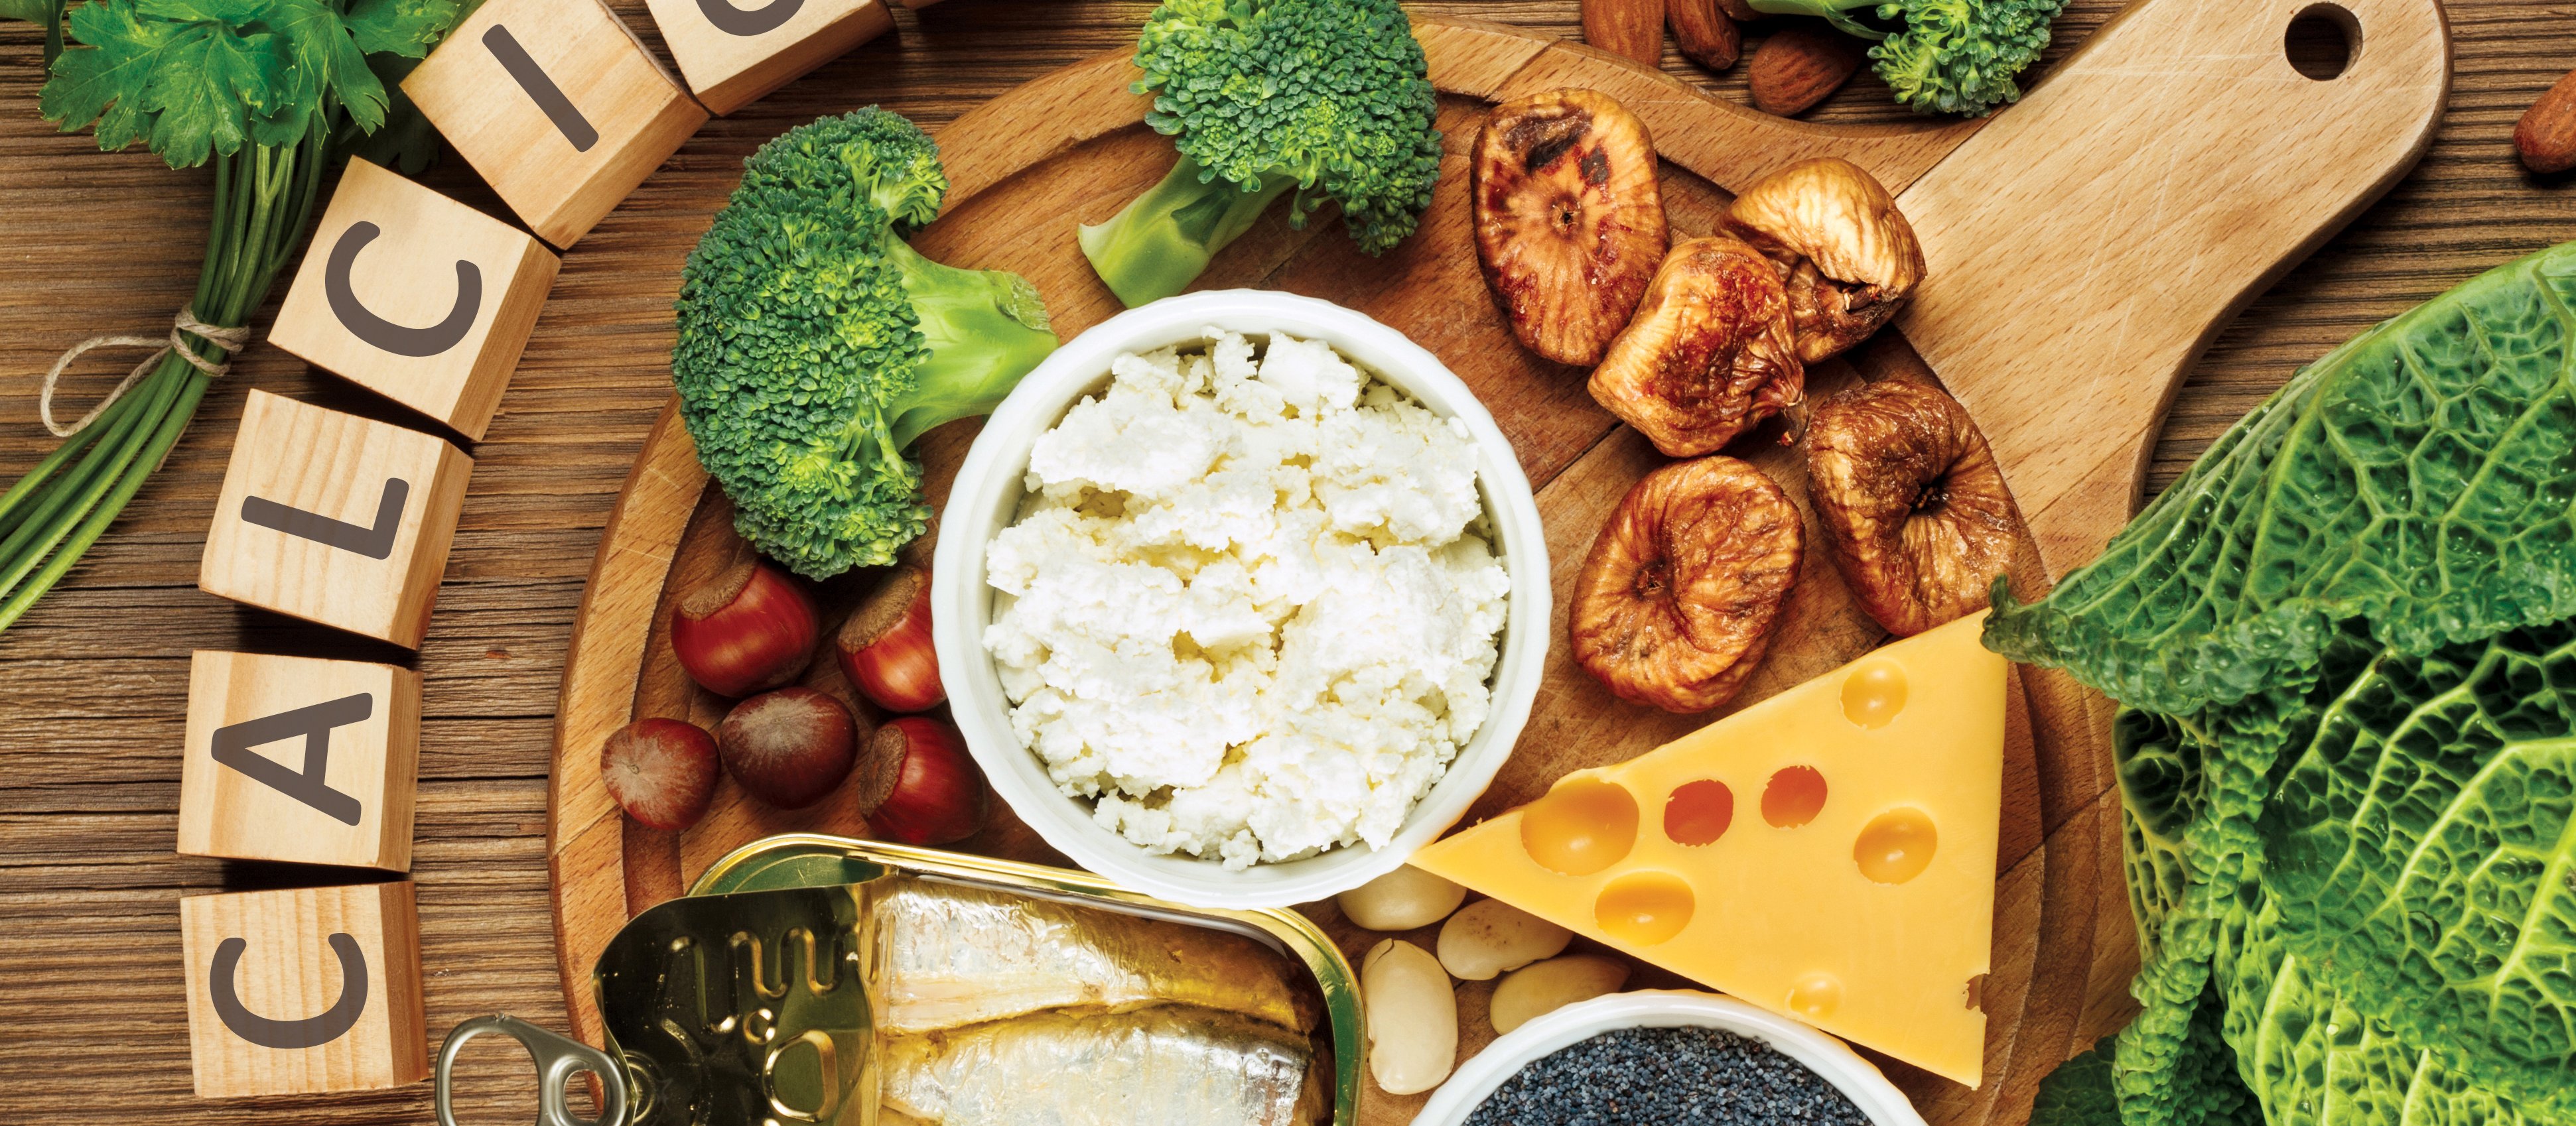 Cheese, greens, nuts and small, soft-boned fish are good sources of calcium